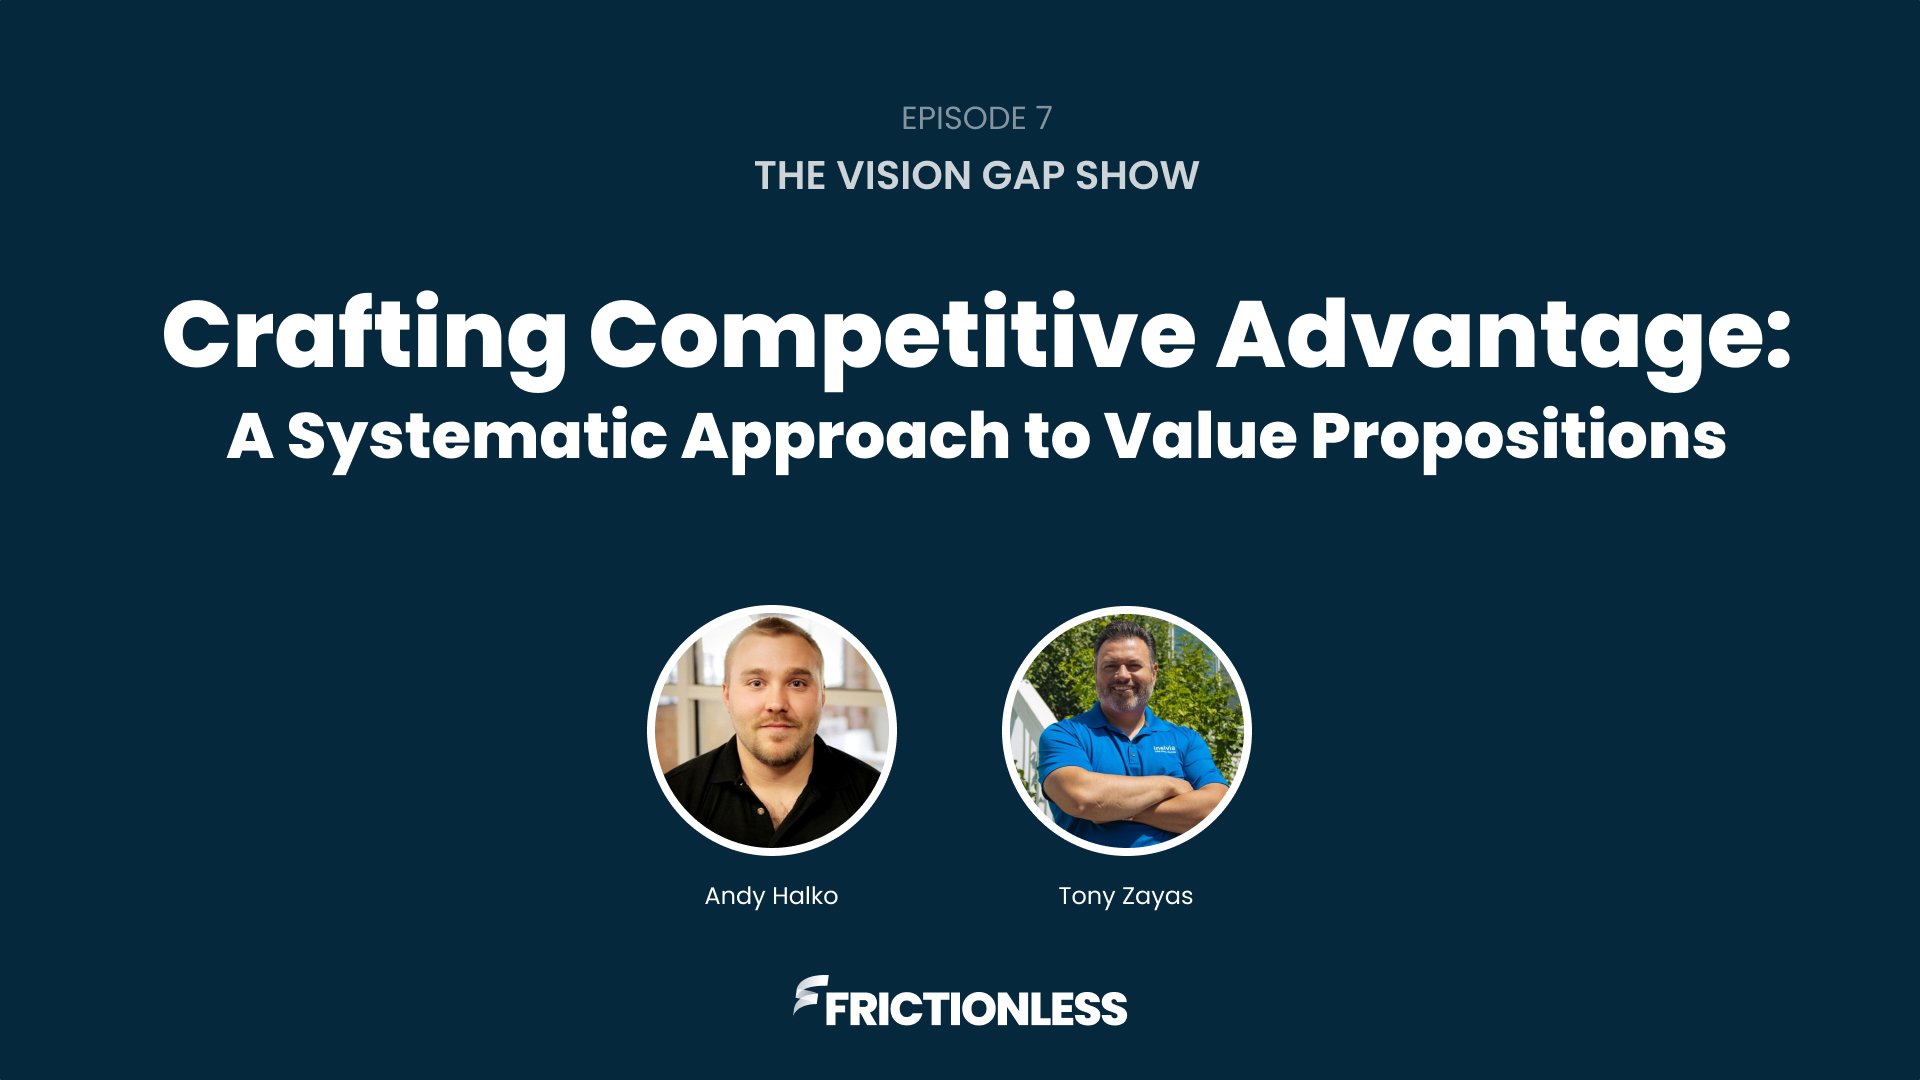 Crafting Competitive Advantage: A Systematic Approach to Value Propositions [Video]